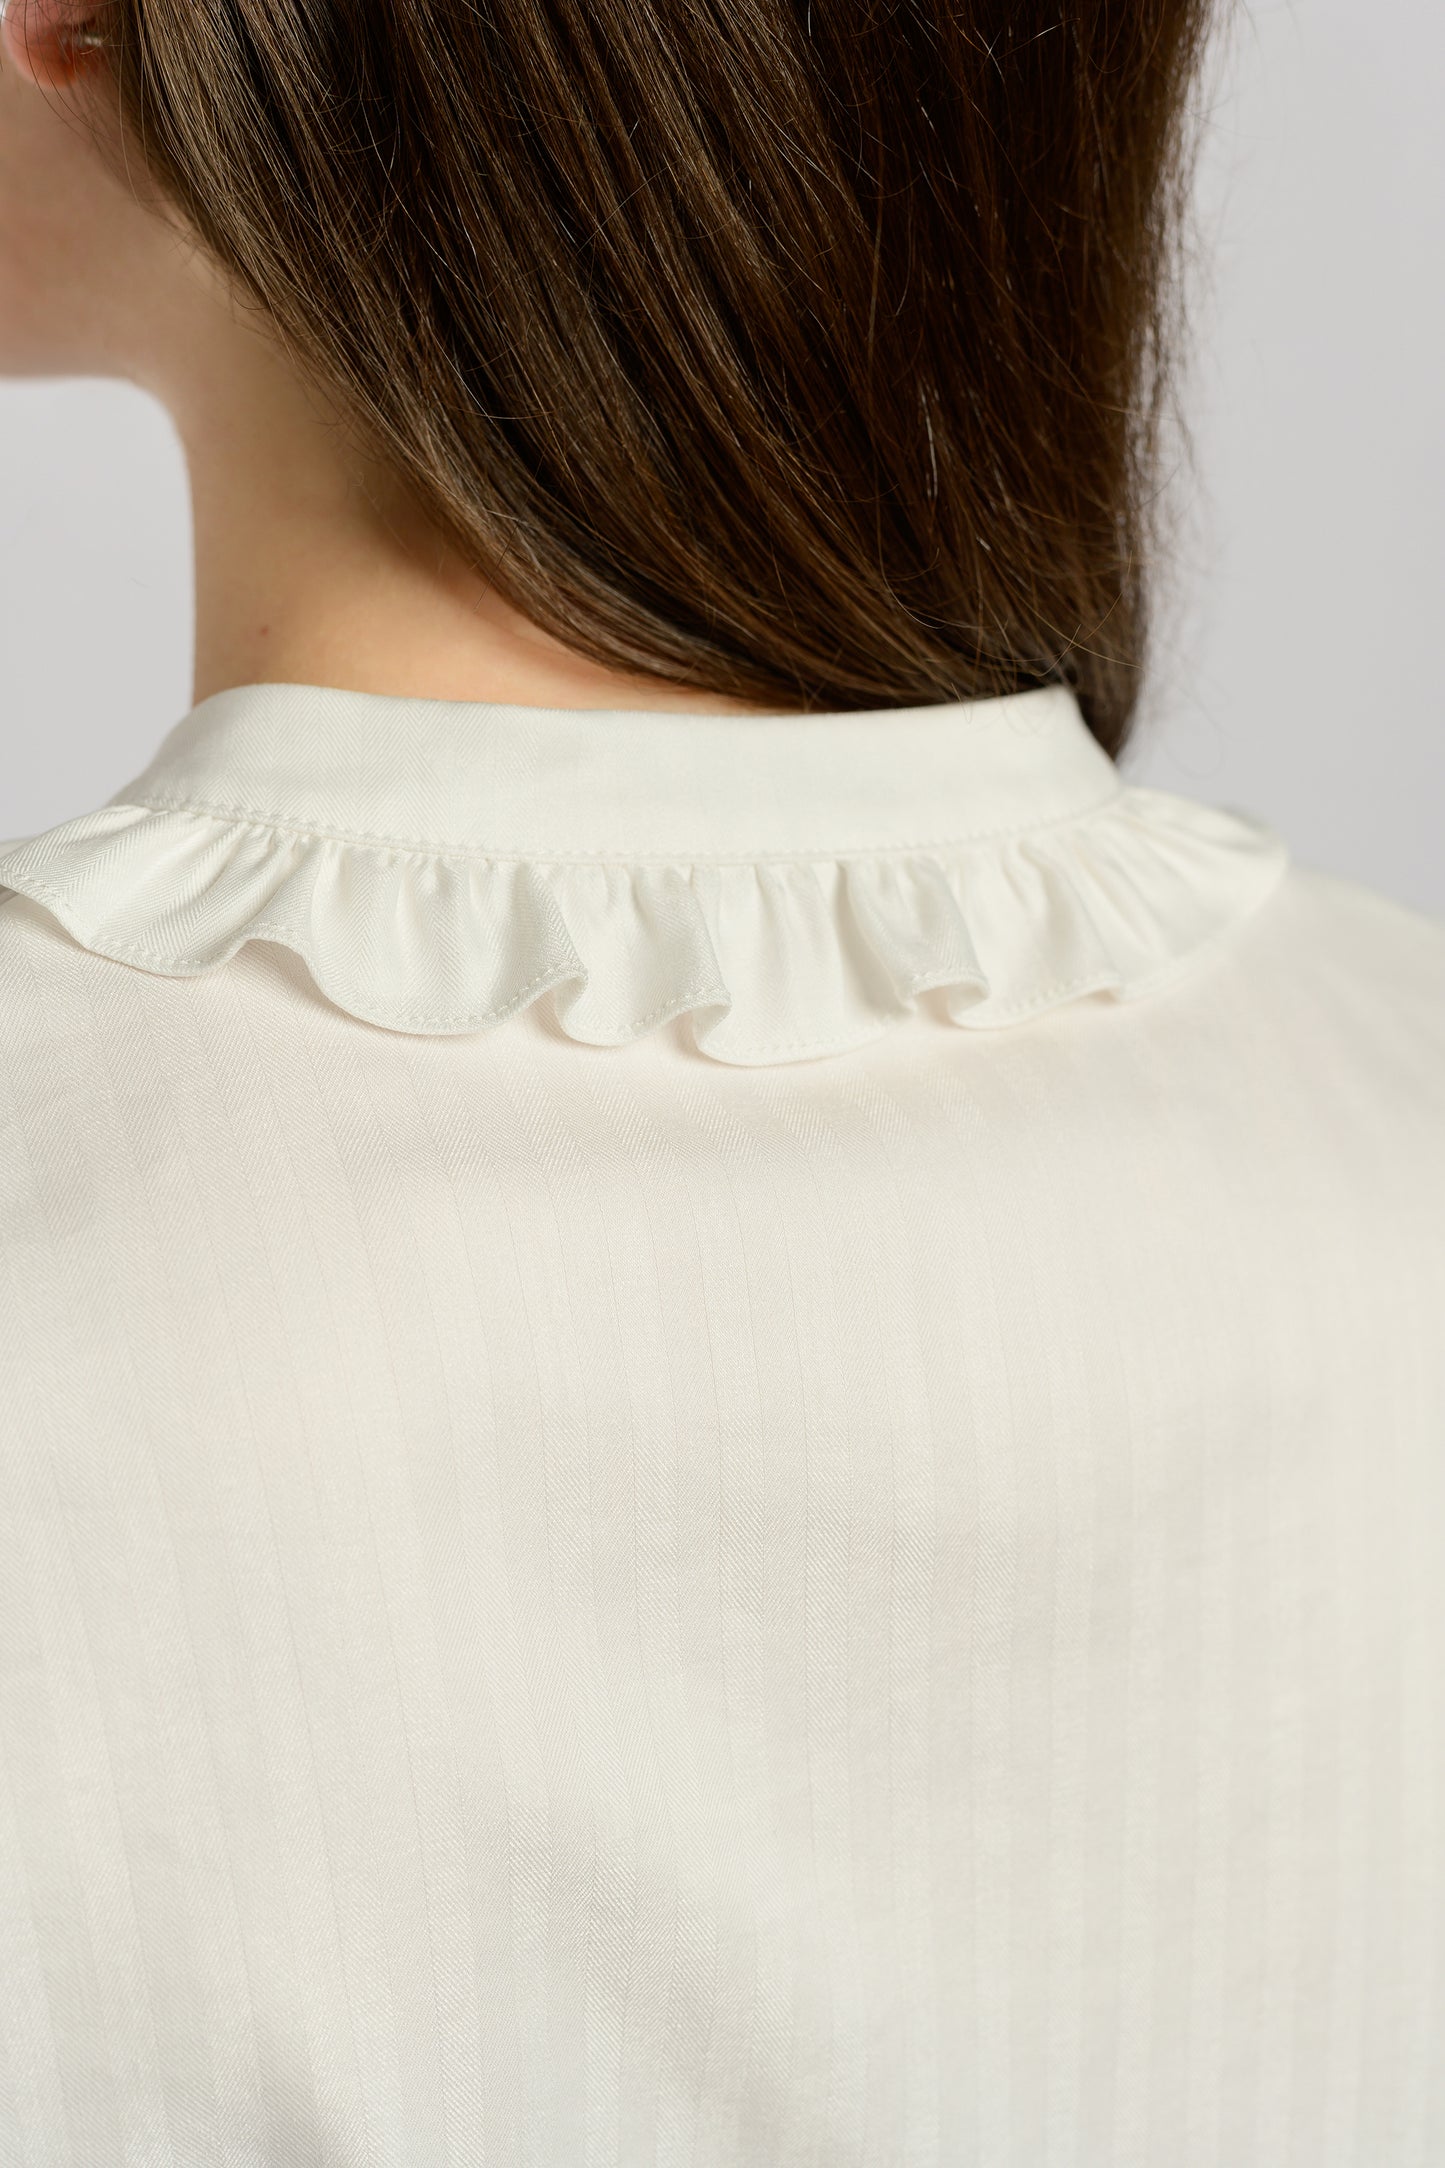 Blouse With Frill Trim Collar - White